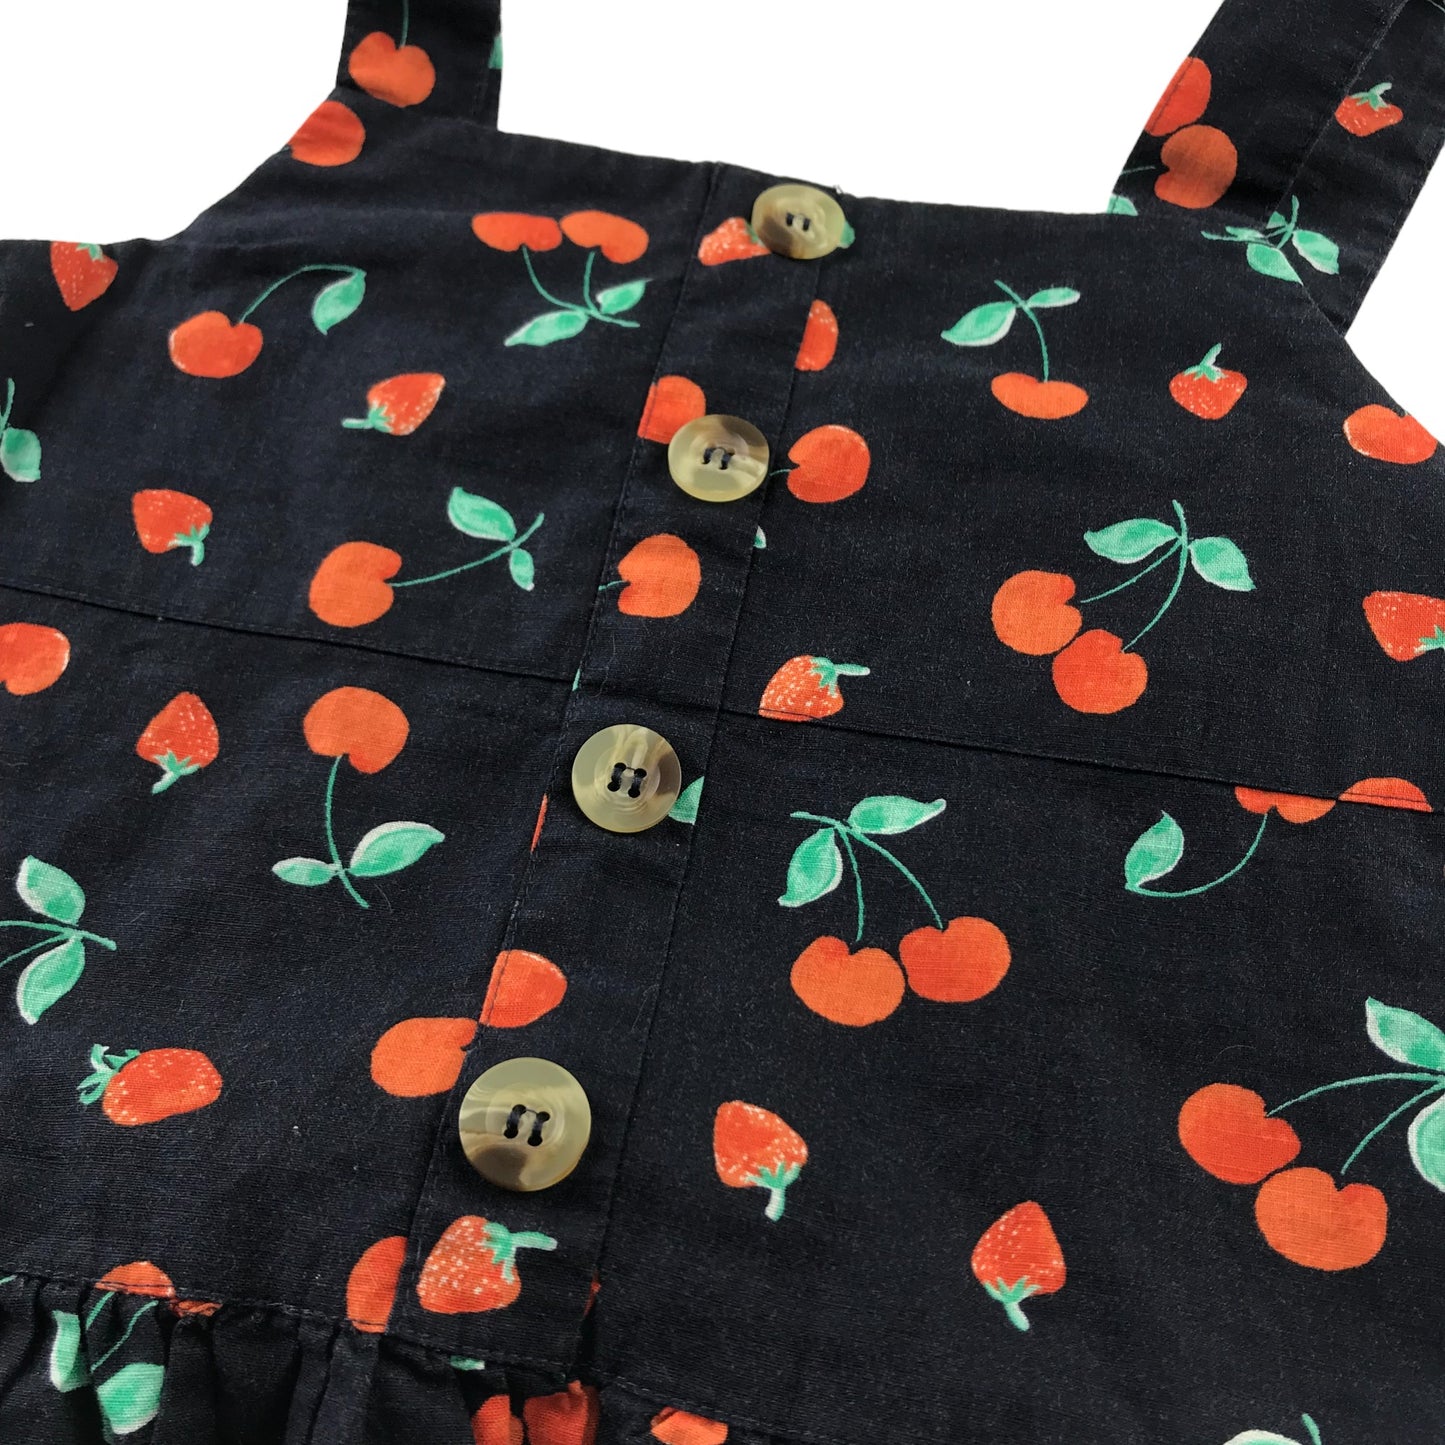 Next Top and Shorts Set Age 8 Dark Navy Strawberry and Cherry Print Pattern Cotton